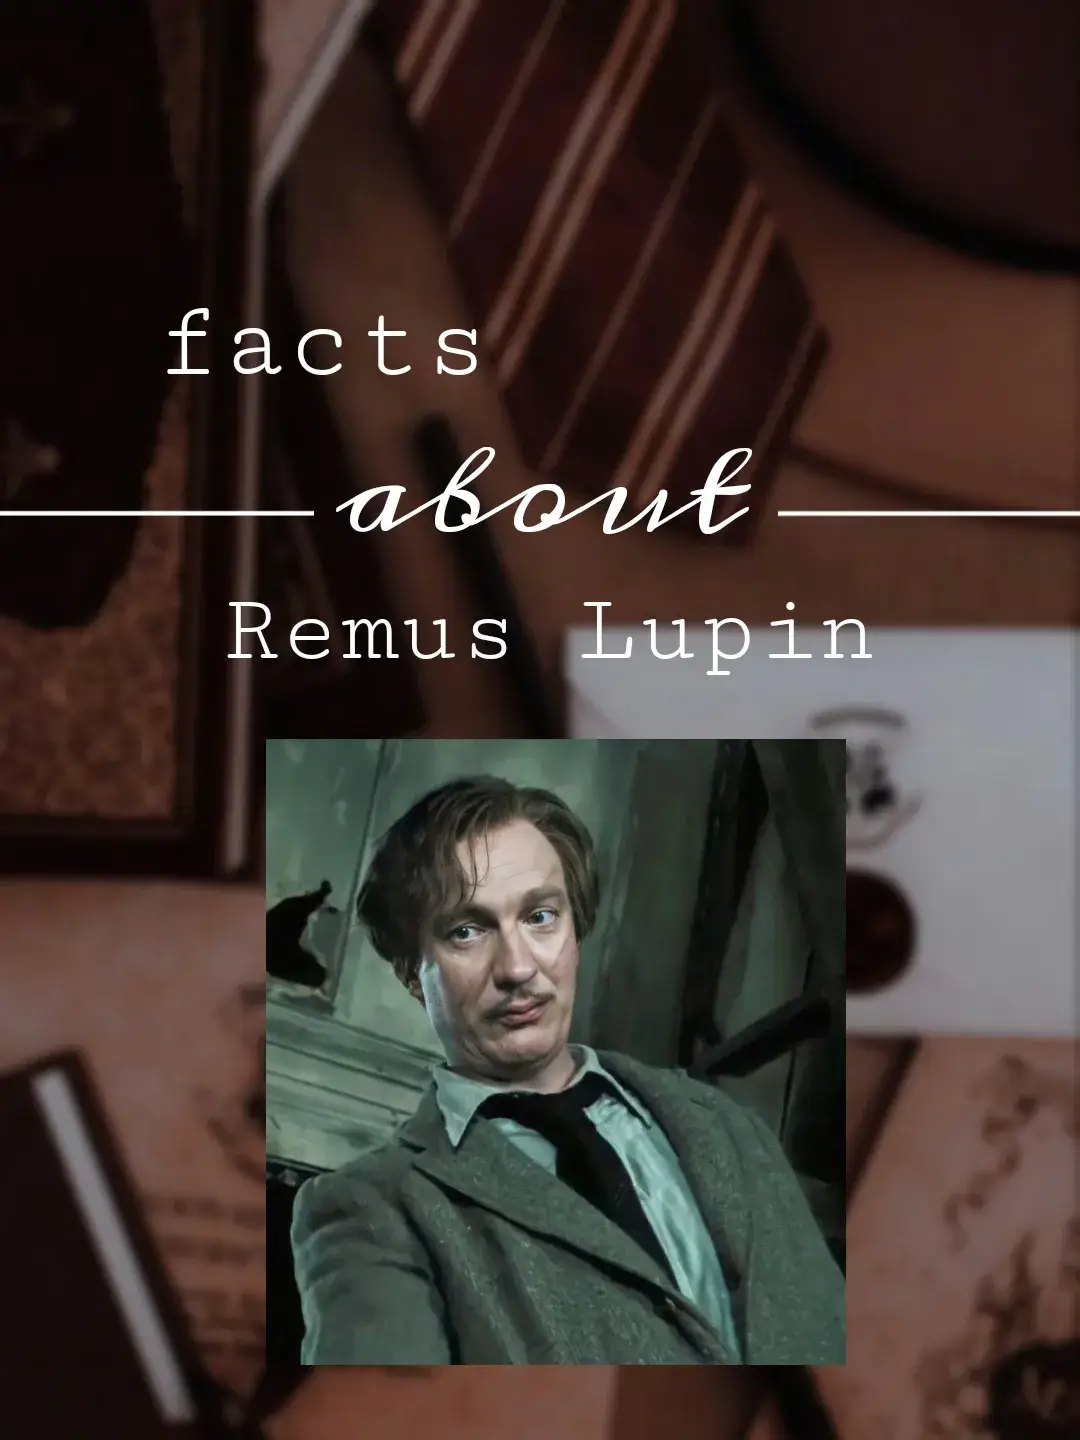 ➡️ some of them are headcanons !! also still have a lot of facts about him .. so maybe another part ☁️ #harrypotter #fyp #foryou #harrypotterfacts #facts #harrypotteractors #harrypottermovies #harrypotterbooks #tomfelton #emmawatson #jkrowling #wizardingworld #sadharrypotterfacts #facts #lunalovegood #harrypotterheadcanons #hermionegranger #remuslupin 